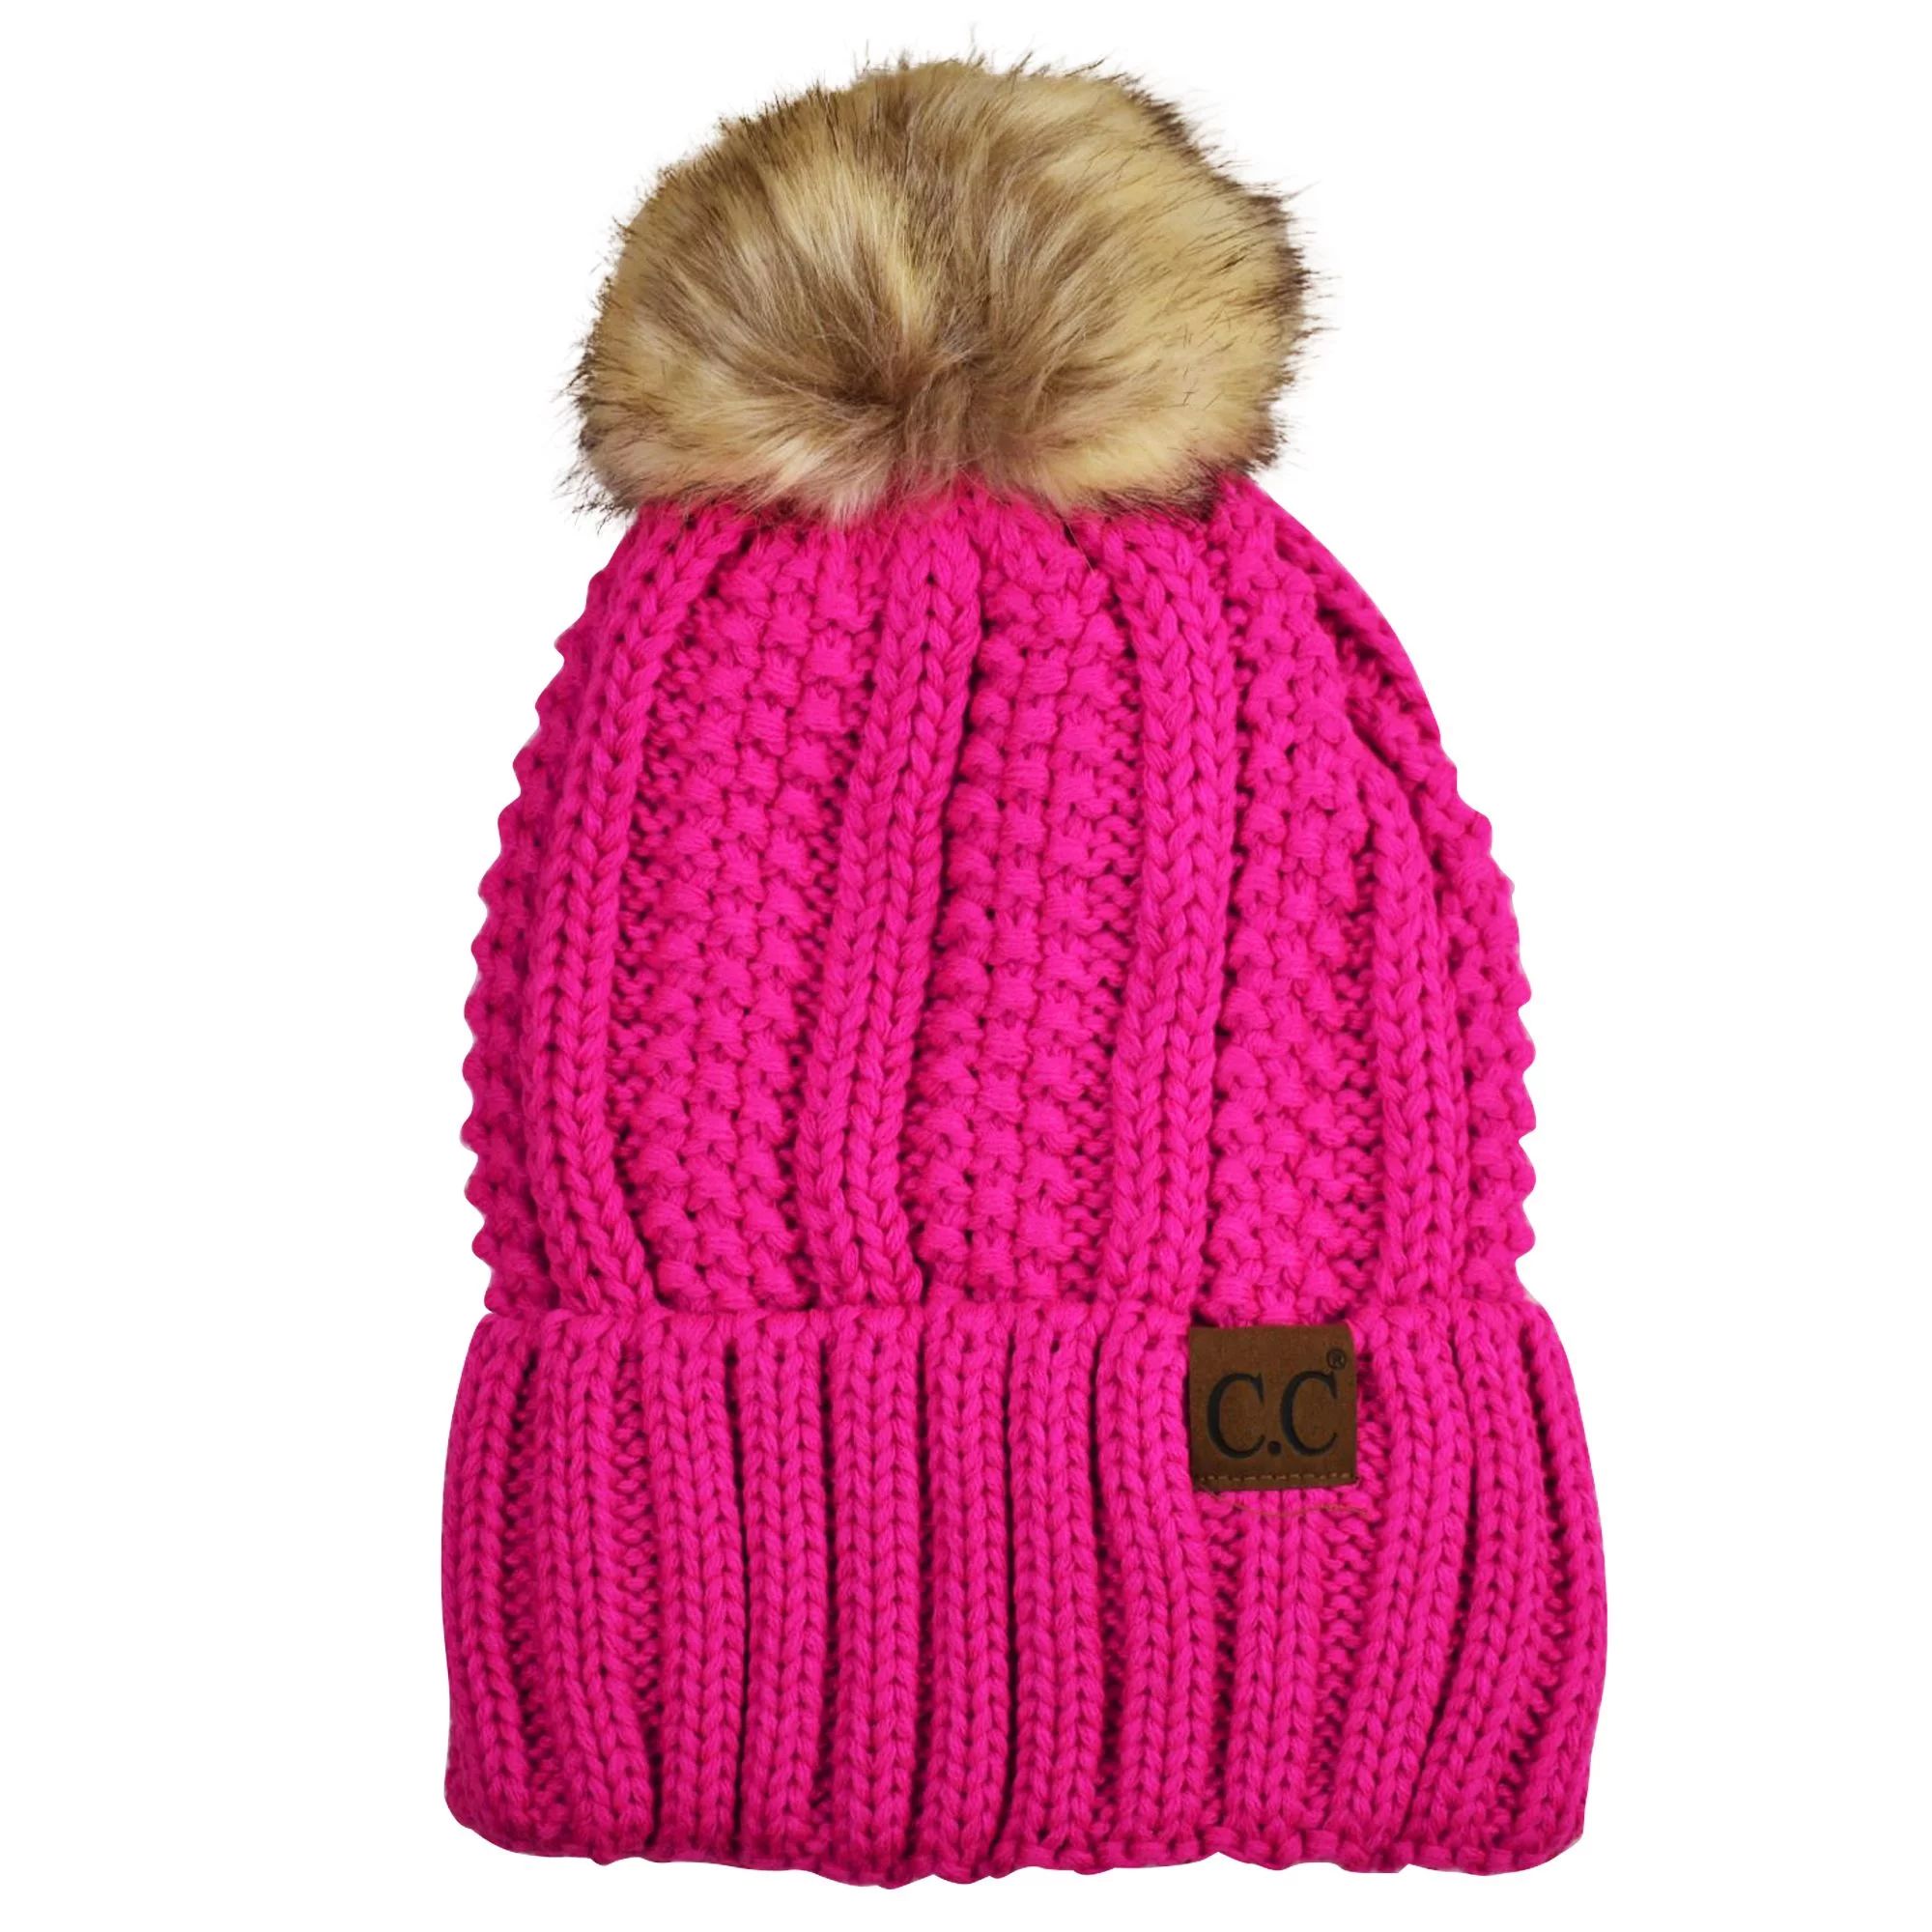 C.C Thick Cable Knit Faux Fuzzy Fur Pom Fleece Lined Skull Cap Cuff Beanie, Neon Pink | Walmart (US)